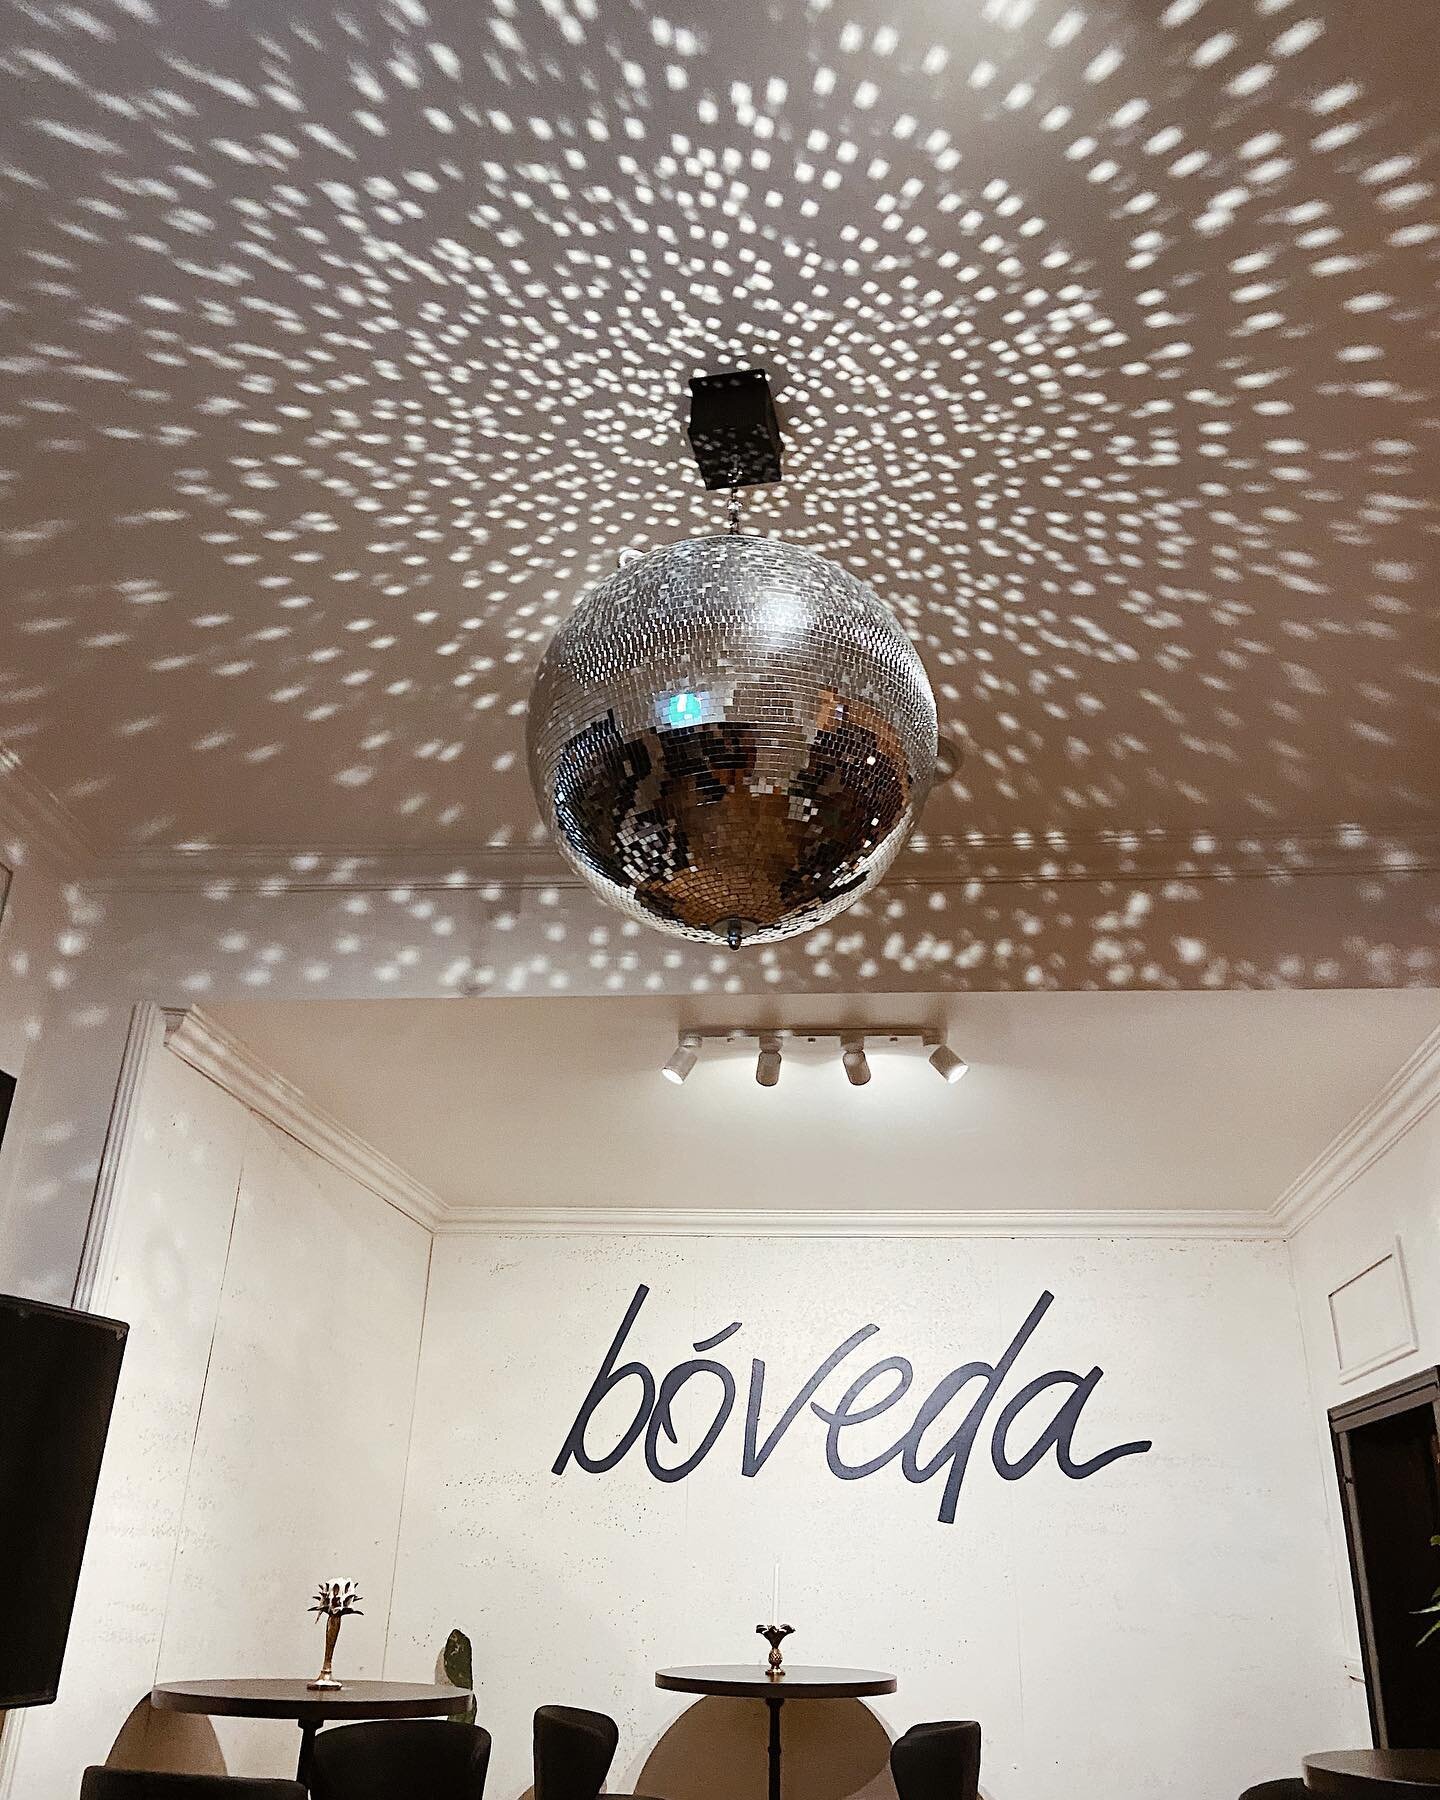 BOVEDA // 🪩 
Looking for something to do this weekend? Why not check out the new kids on the block and dine in @bovedathirroul for dinner with your friends or family ⚡️

With good vibes, delicious margaritas, the best customer service and Mexican fo